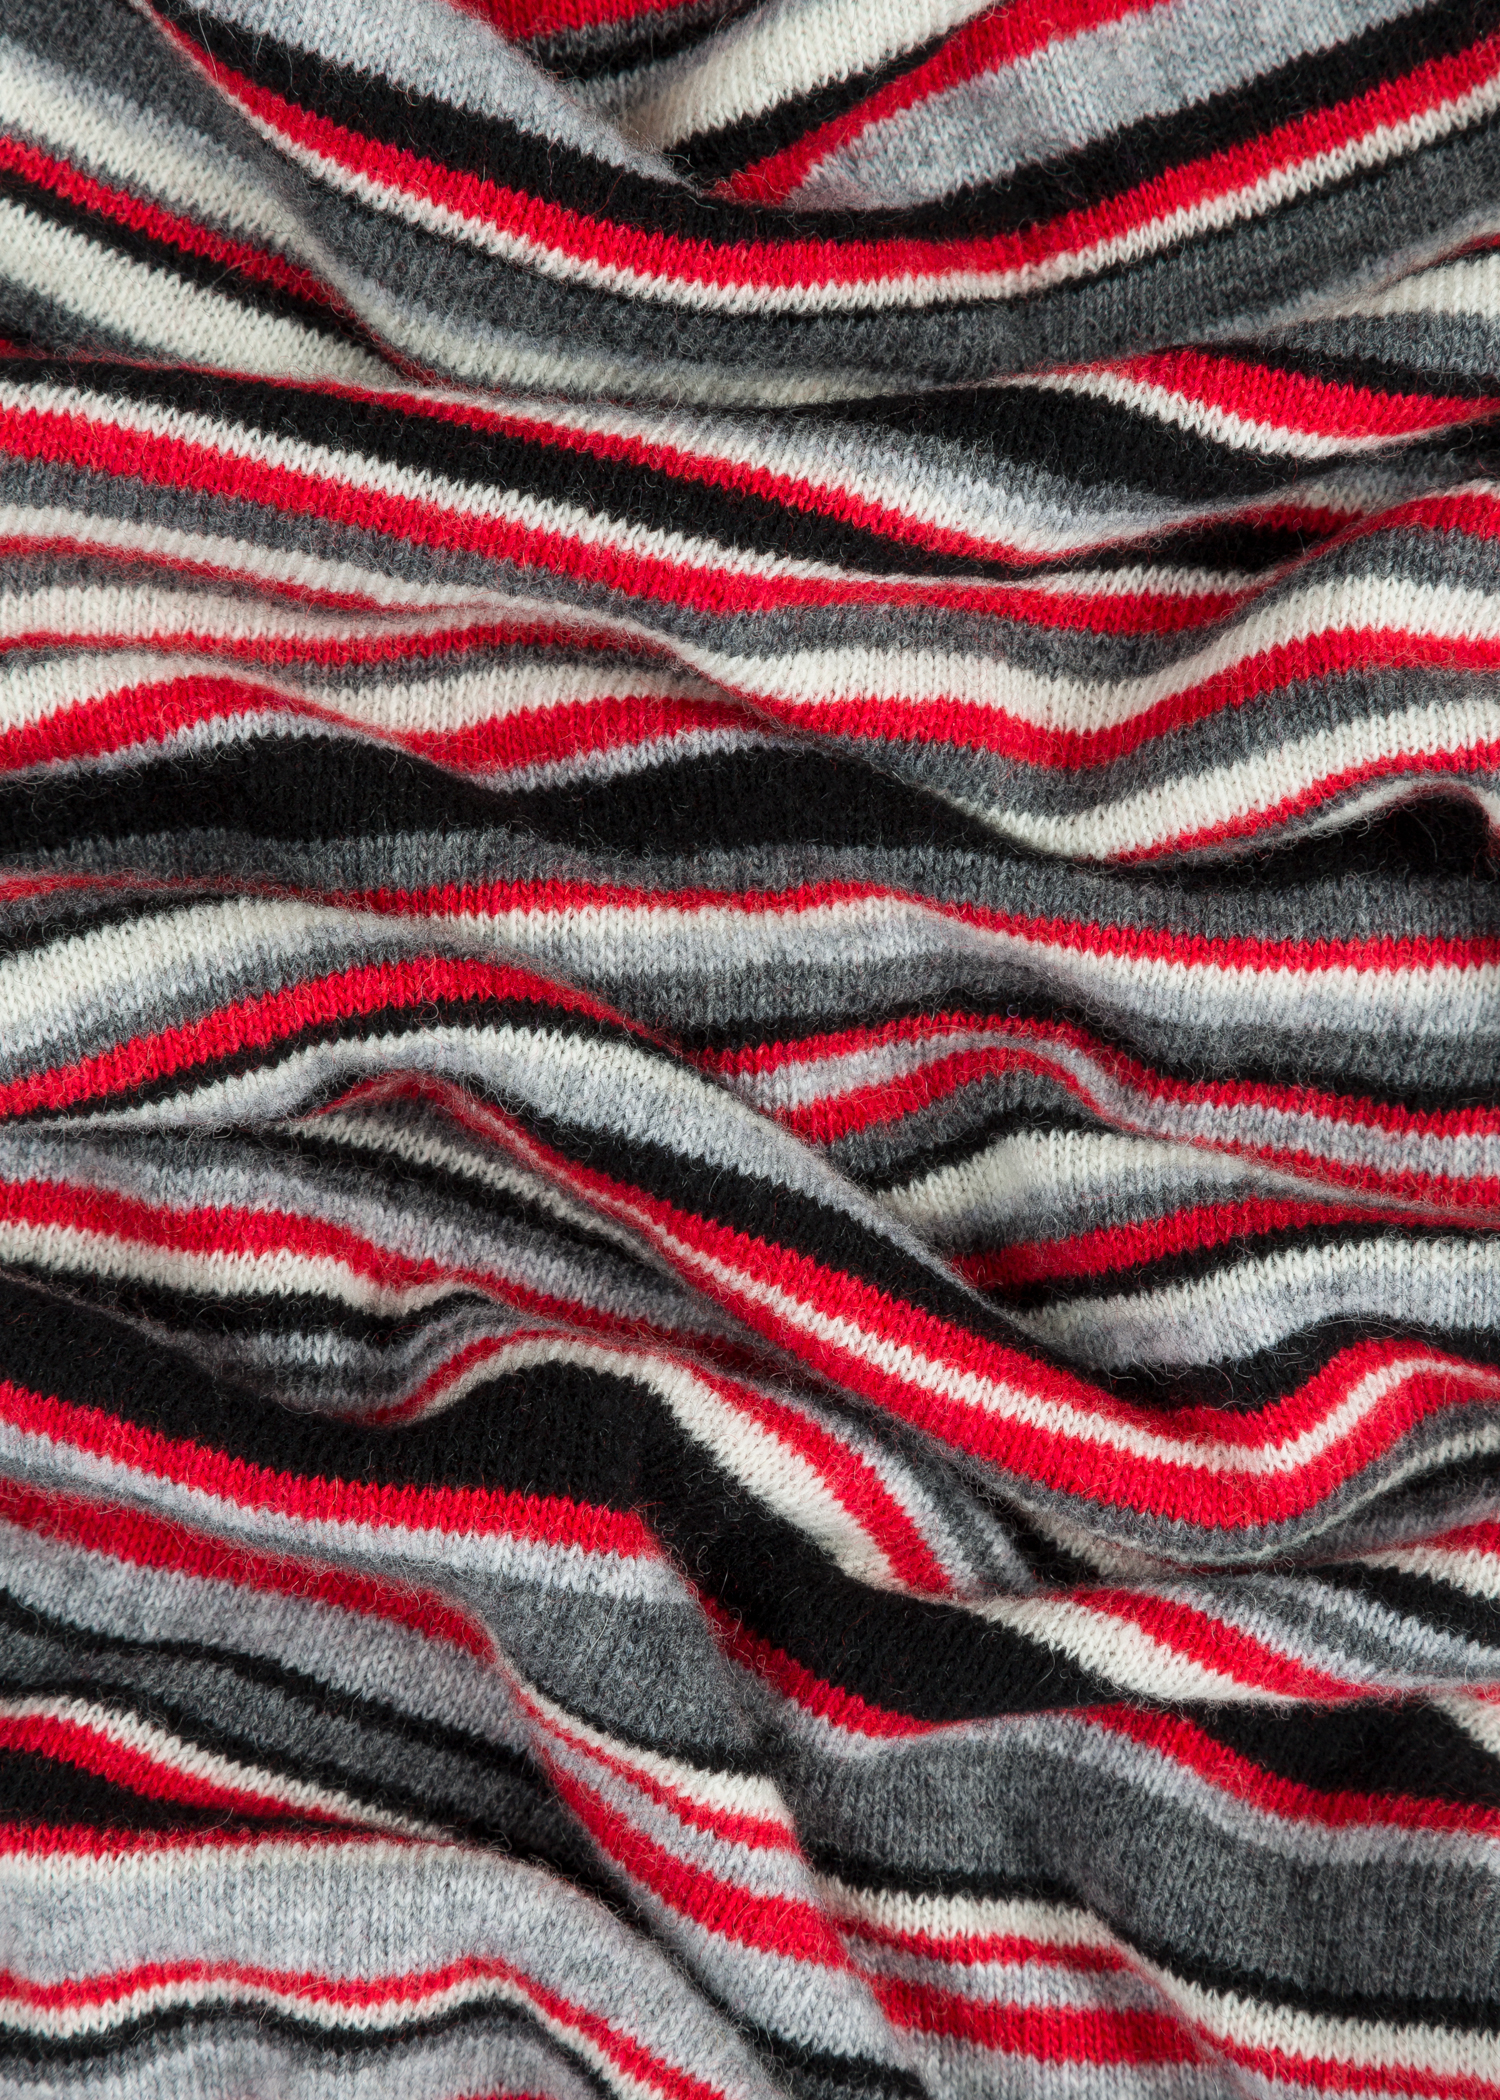 Creased view - Paul Smith & Manchester United – Red Striped Wool-Cashmere Scarf Paul Smith